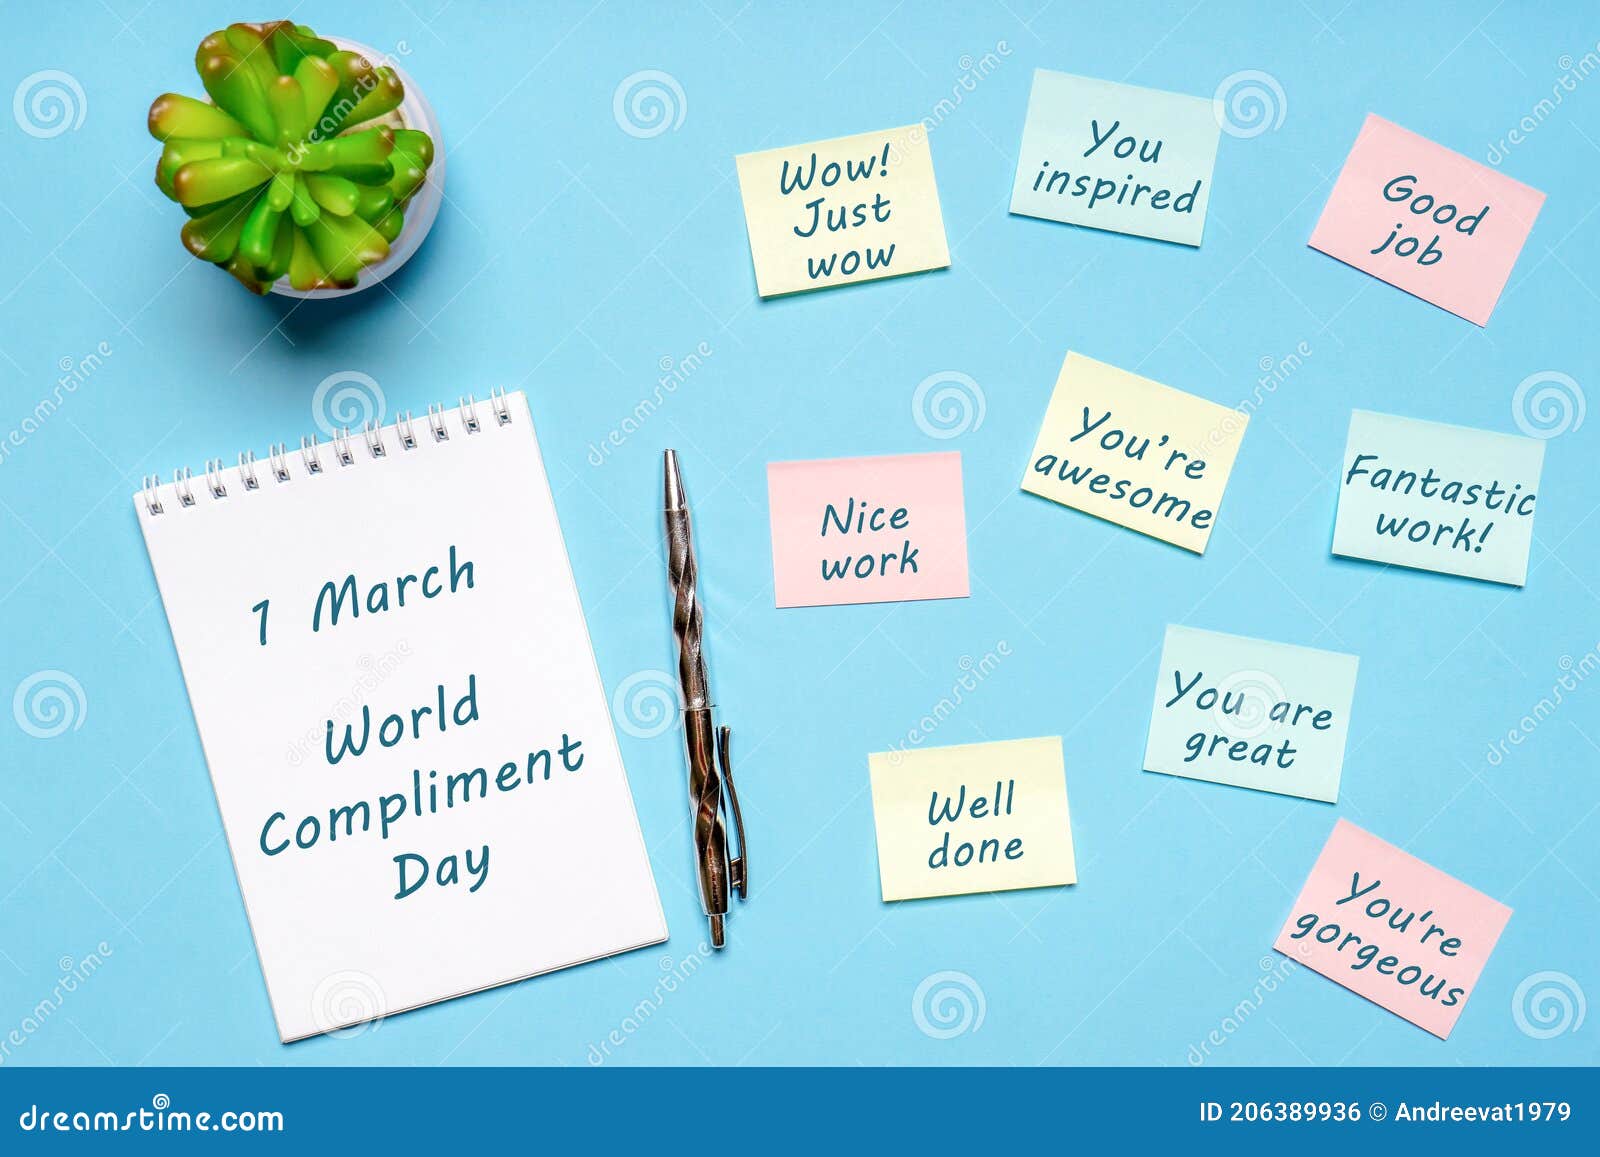 happy world compliment day. office desk with plant, notebook, pen and paper slips with compliments text for office worker such as